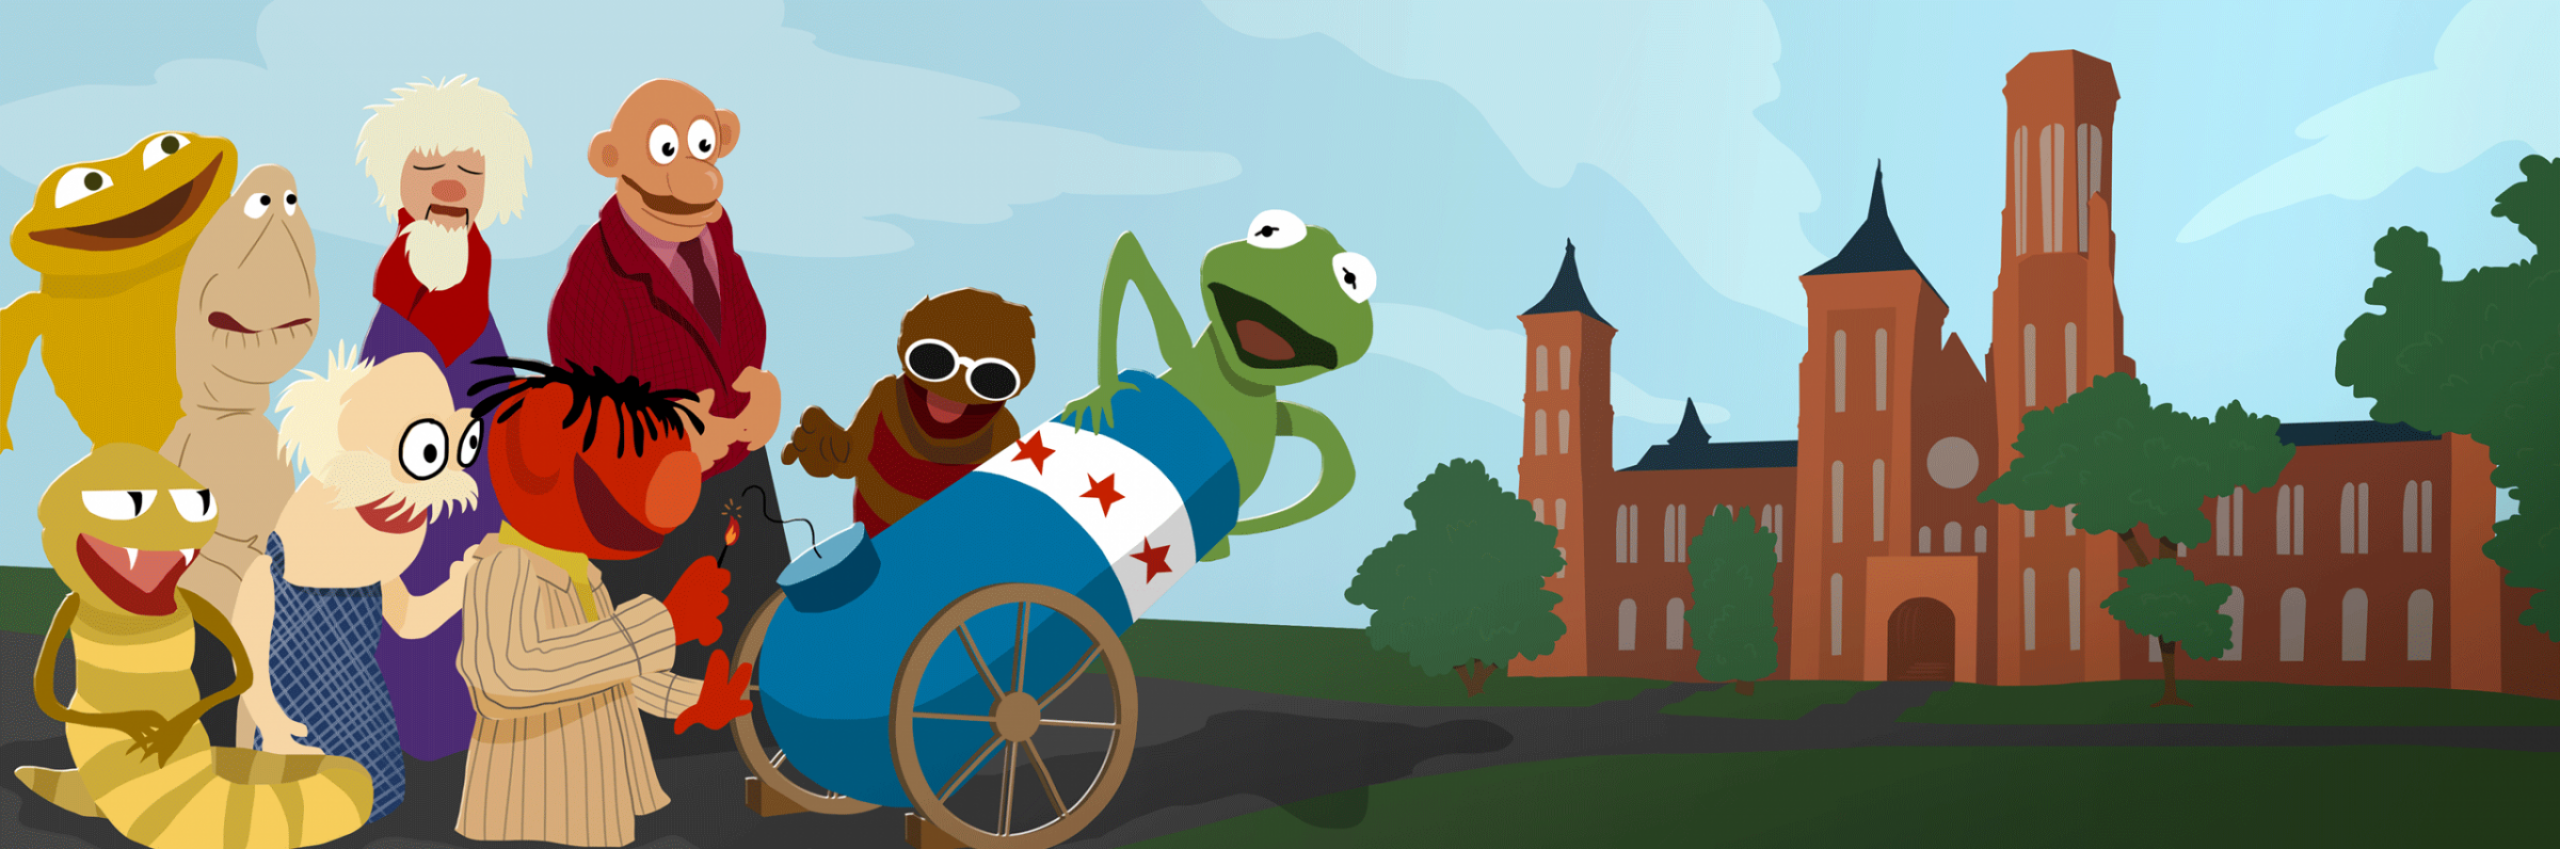 An illustration of a group of muppets next to the Smithsonian castle.